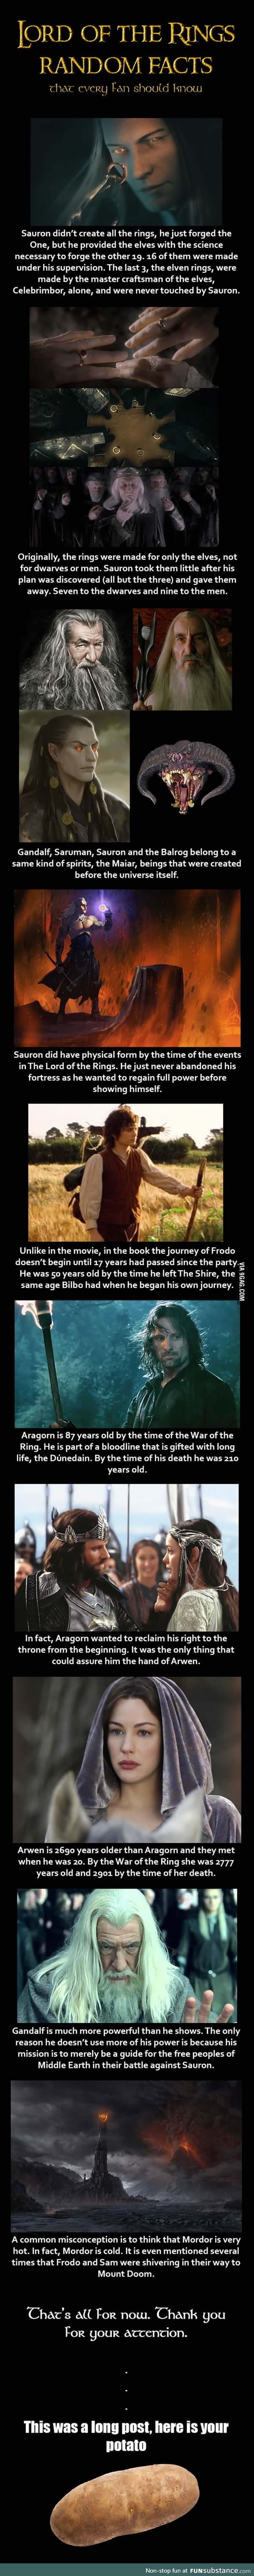 Just some random facts about LOTR